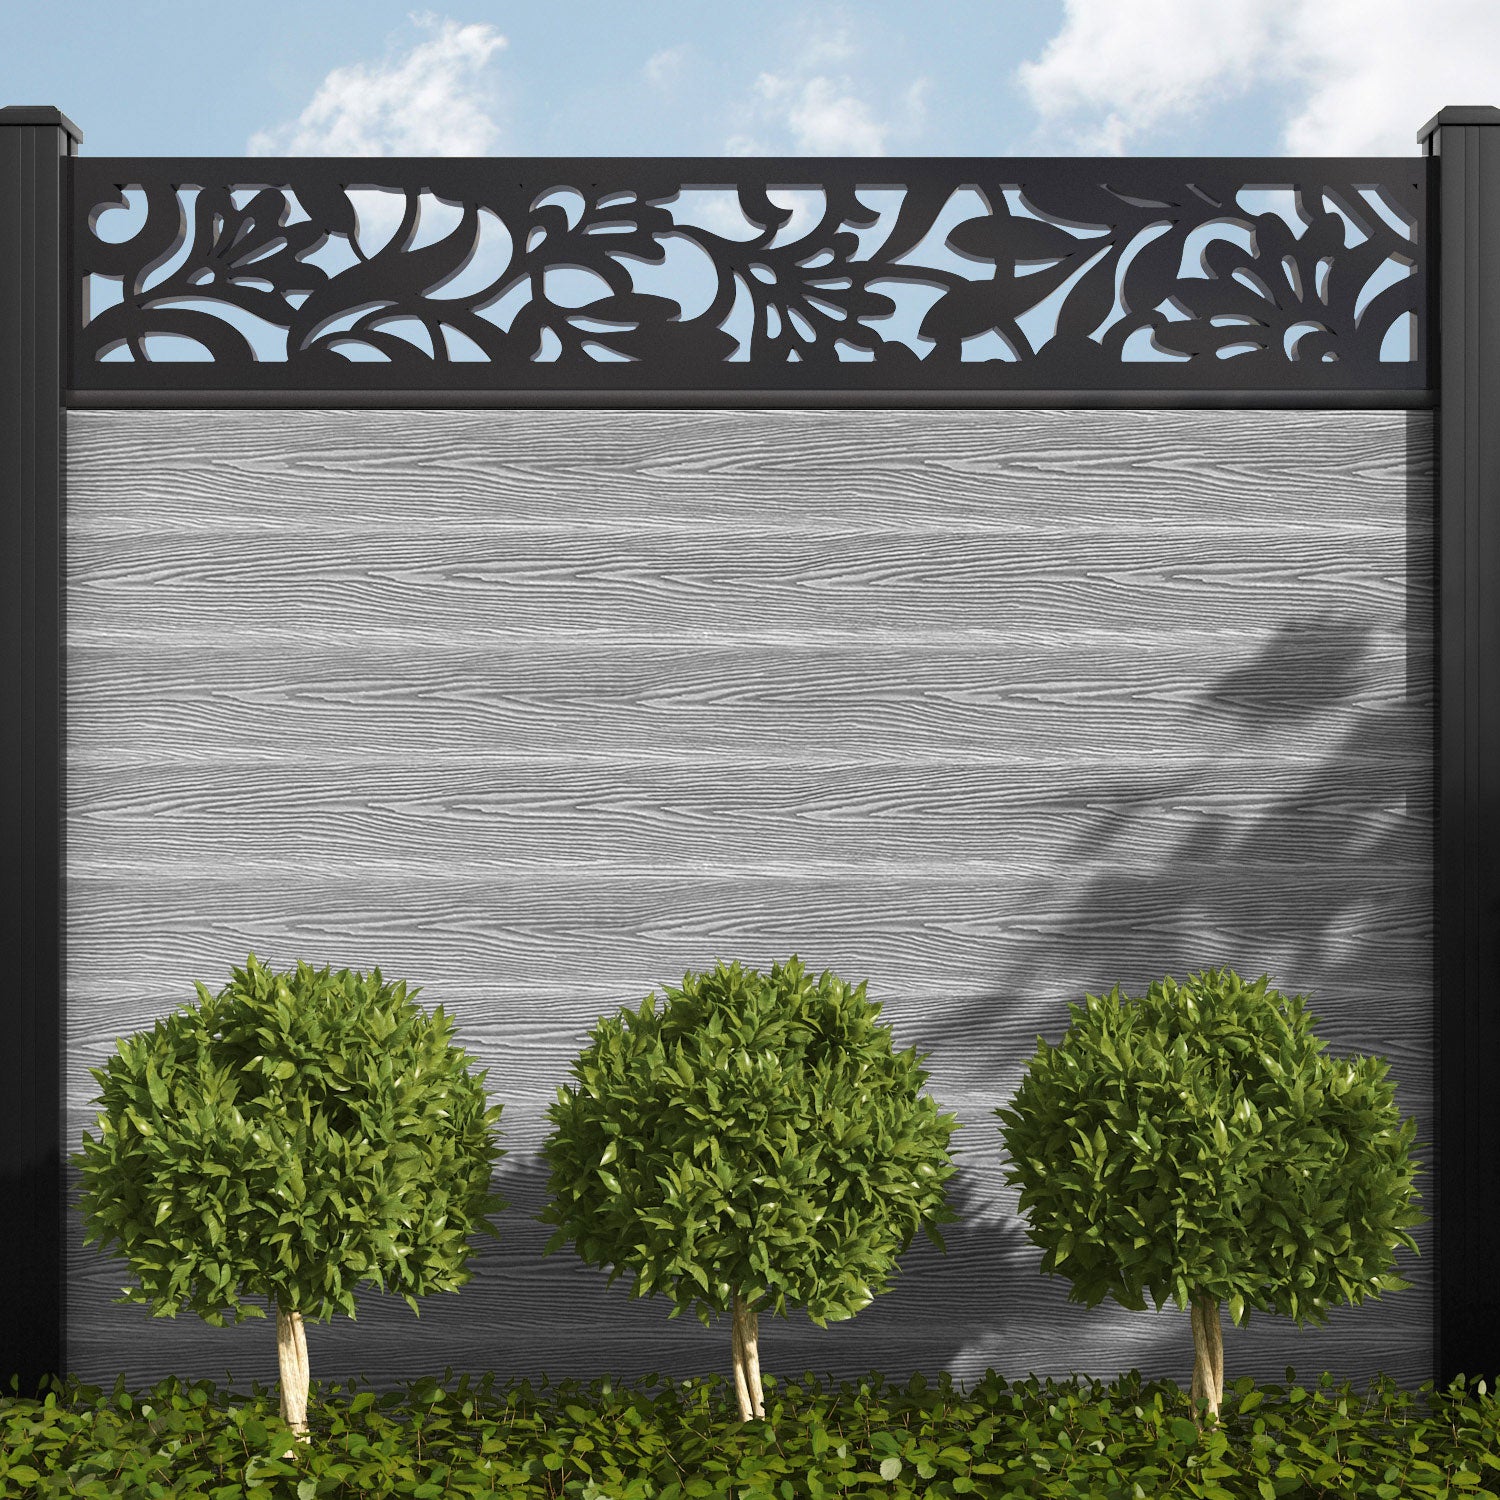 Heritage Fence Screen – Charles & Ivy